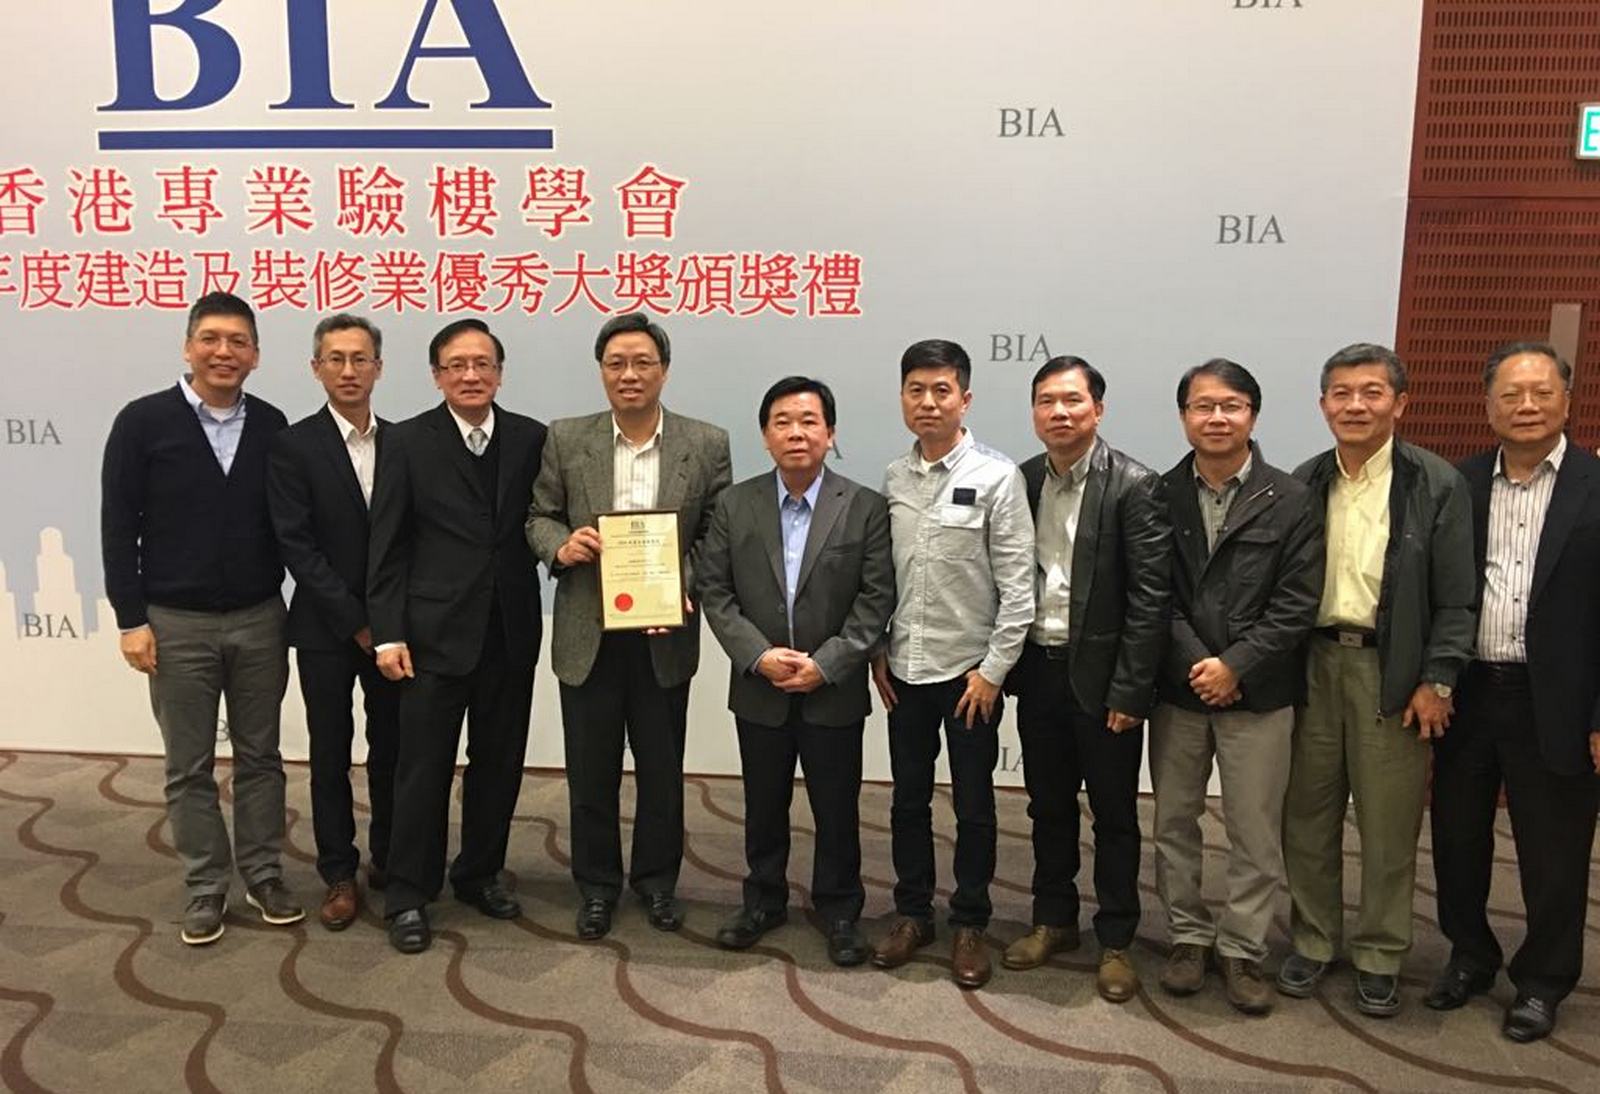 Hip Hing has been recognised by the Academy for three consecutive years in recognition of the Company's quality excellence